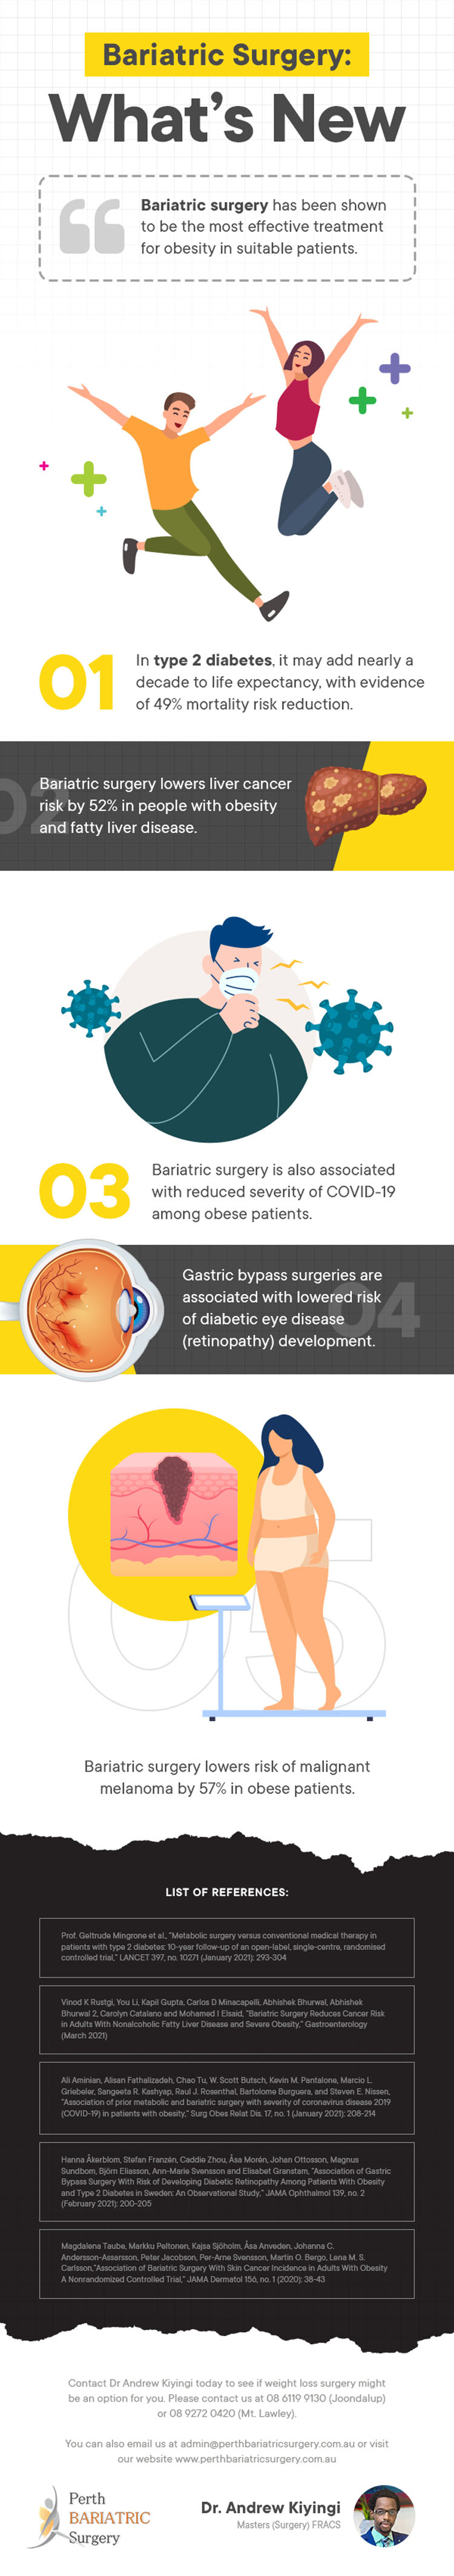 Bariatric Surgery in Perth